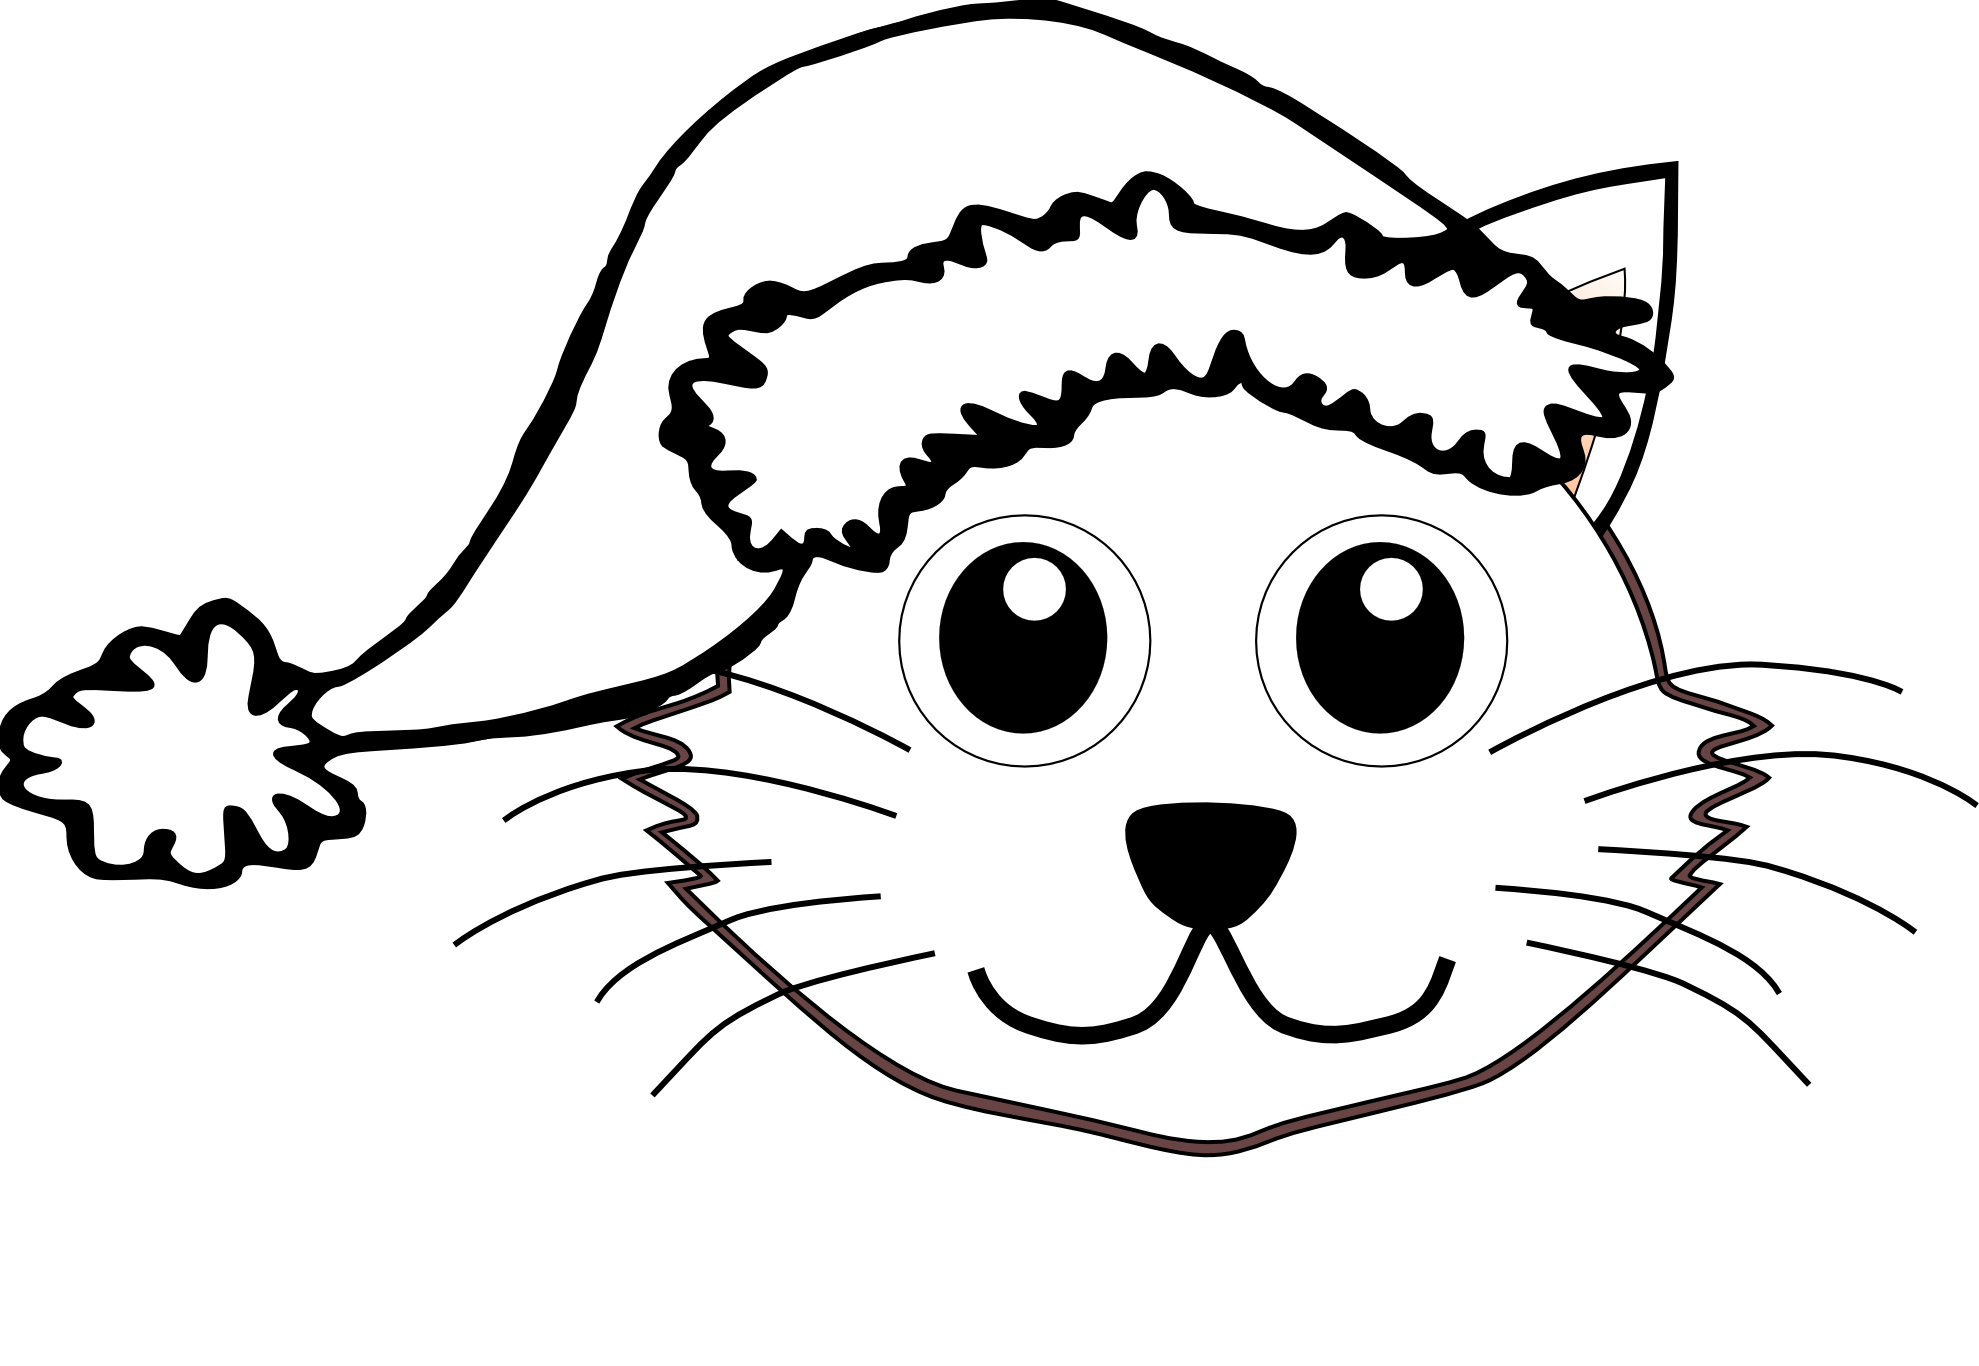 Kitty clipart printable. Pirate hat black and